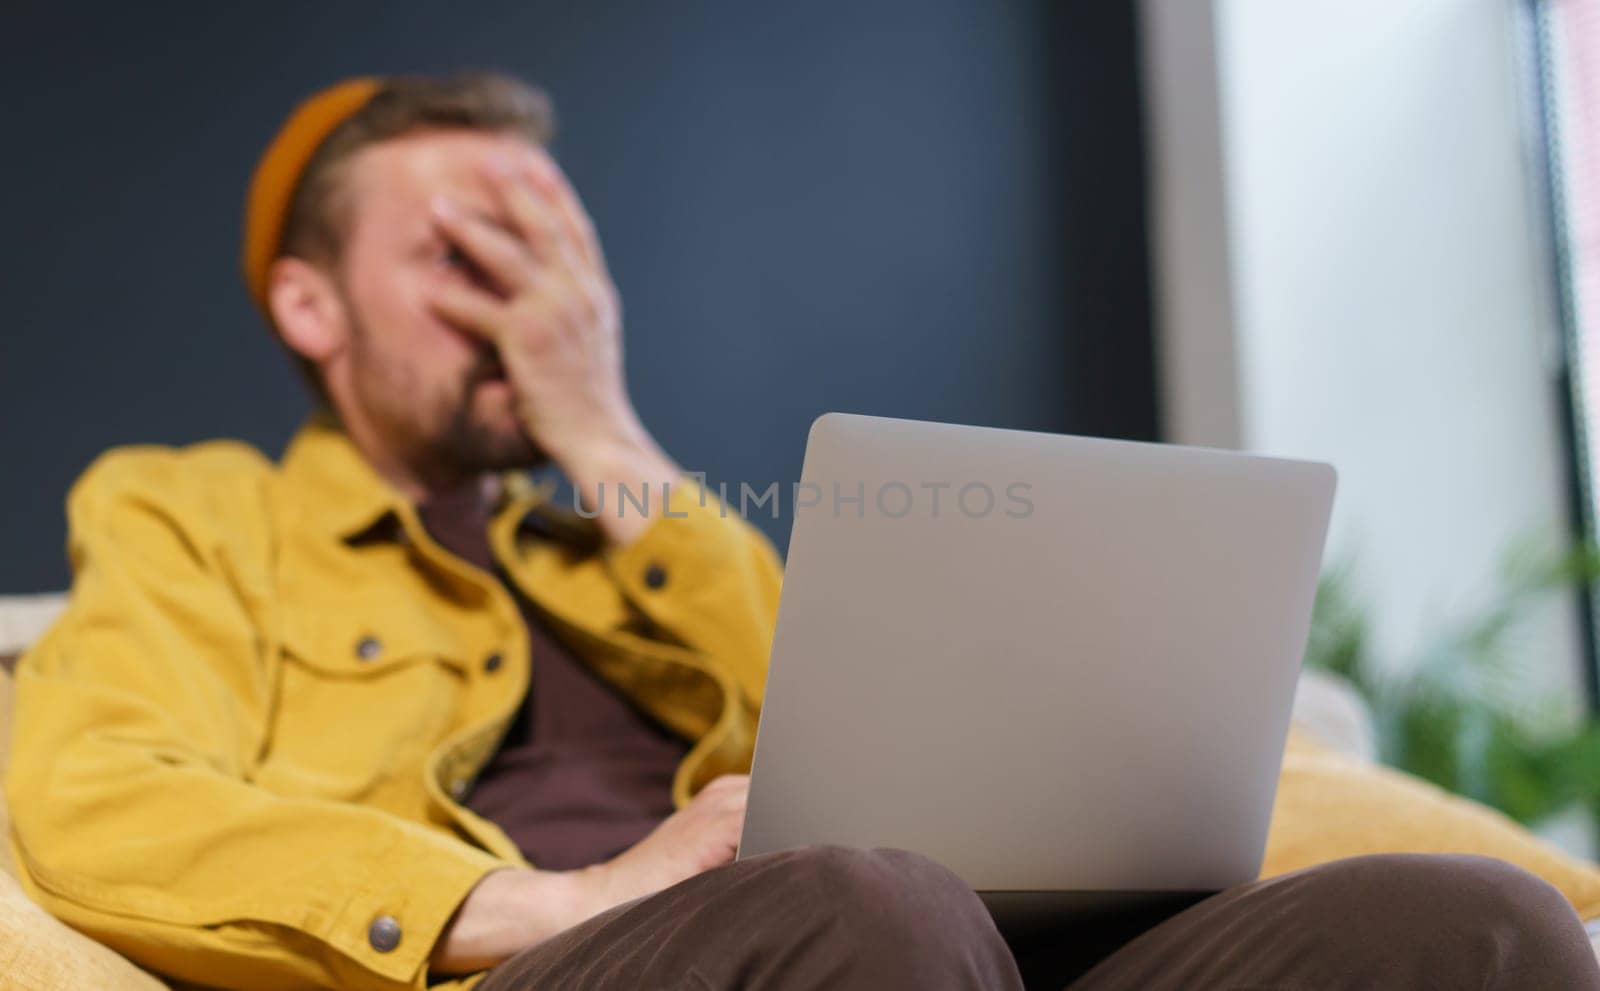 Man sitting on sofa with laptop, showing facepalm gesture with hand on face. Focus is on laptop, which suggests that the man may be experiencing frustration or disappointment related to the technology. High quality photo